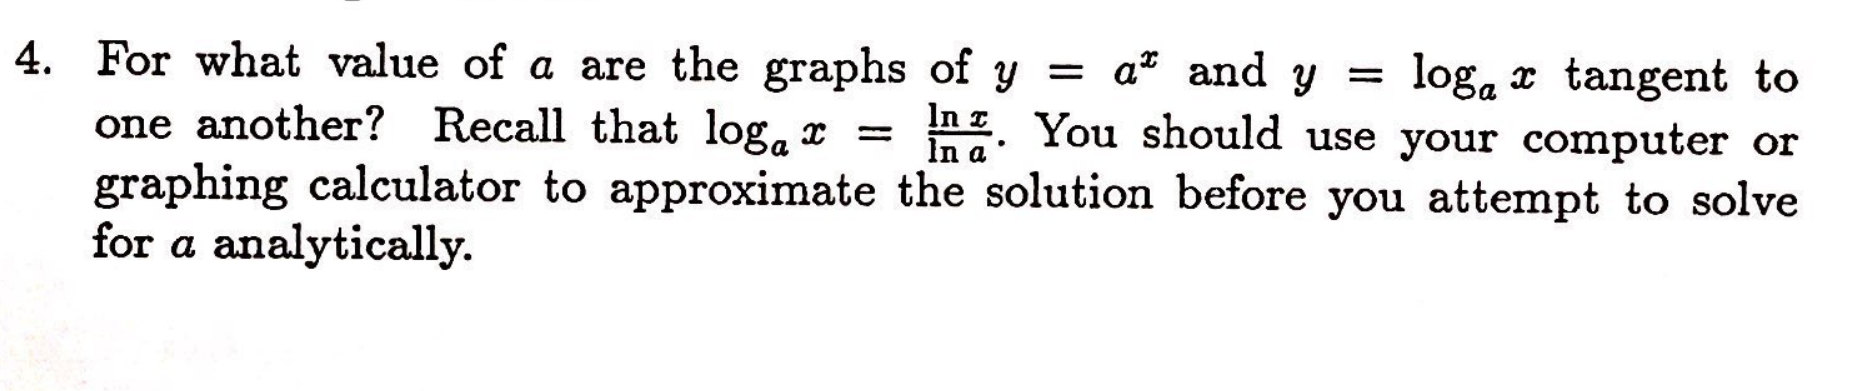 4. For what value of a are the graphs of y
Recall that loga
a and y
loga tangent to
In zYou should use your computer or
graphing calculator to approximate the solution before you attempt to solve
one another?
for a analytically.
